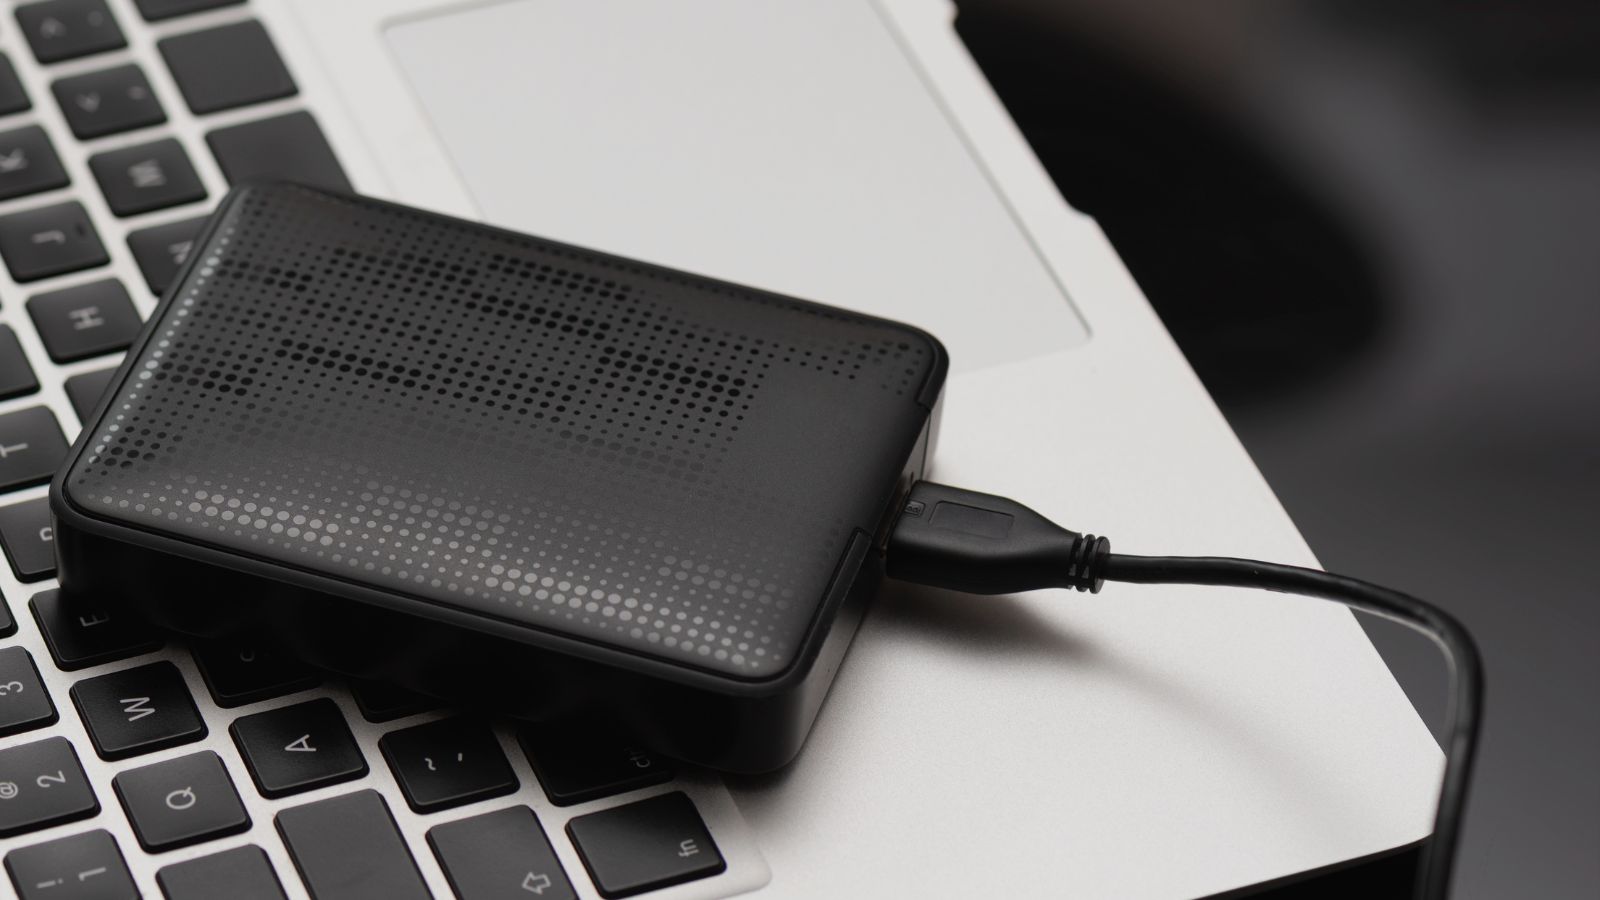 Modder Uses An External SSD As A Seagate Expansion Drive For Xbox